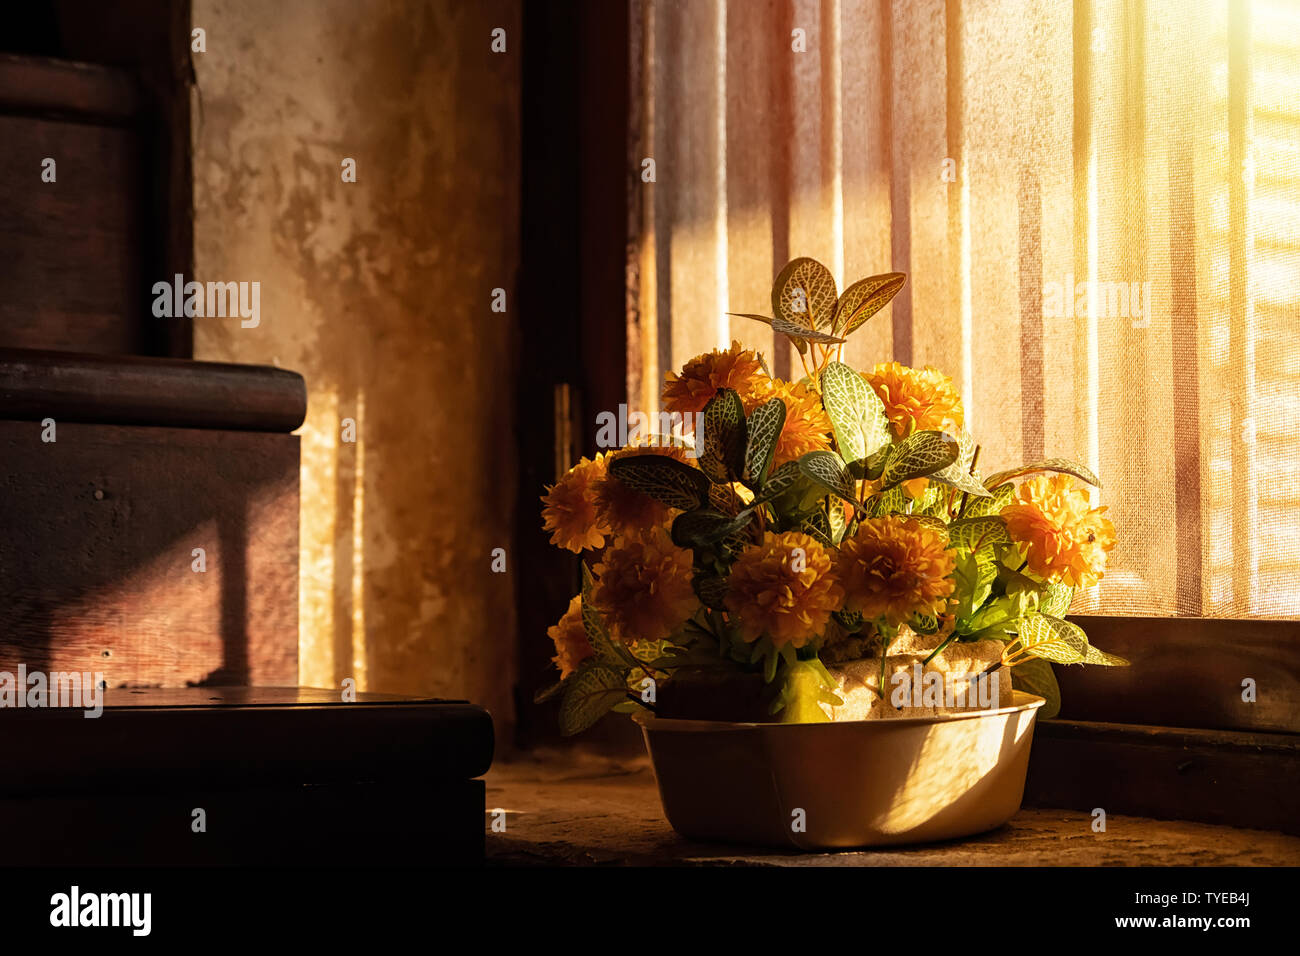 plastic flowers in old pots get sunlight from the side of the window. Stock Photo